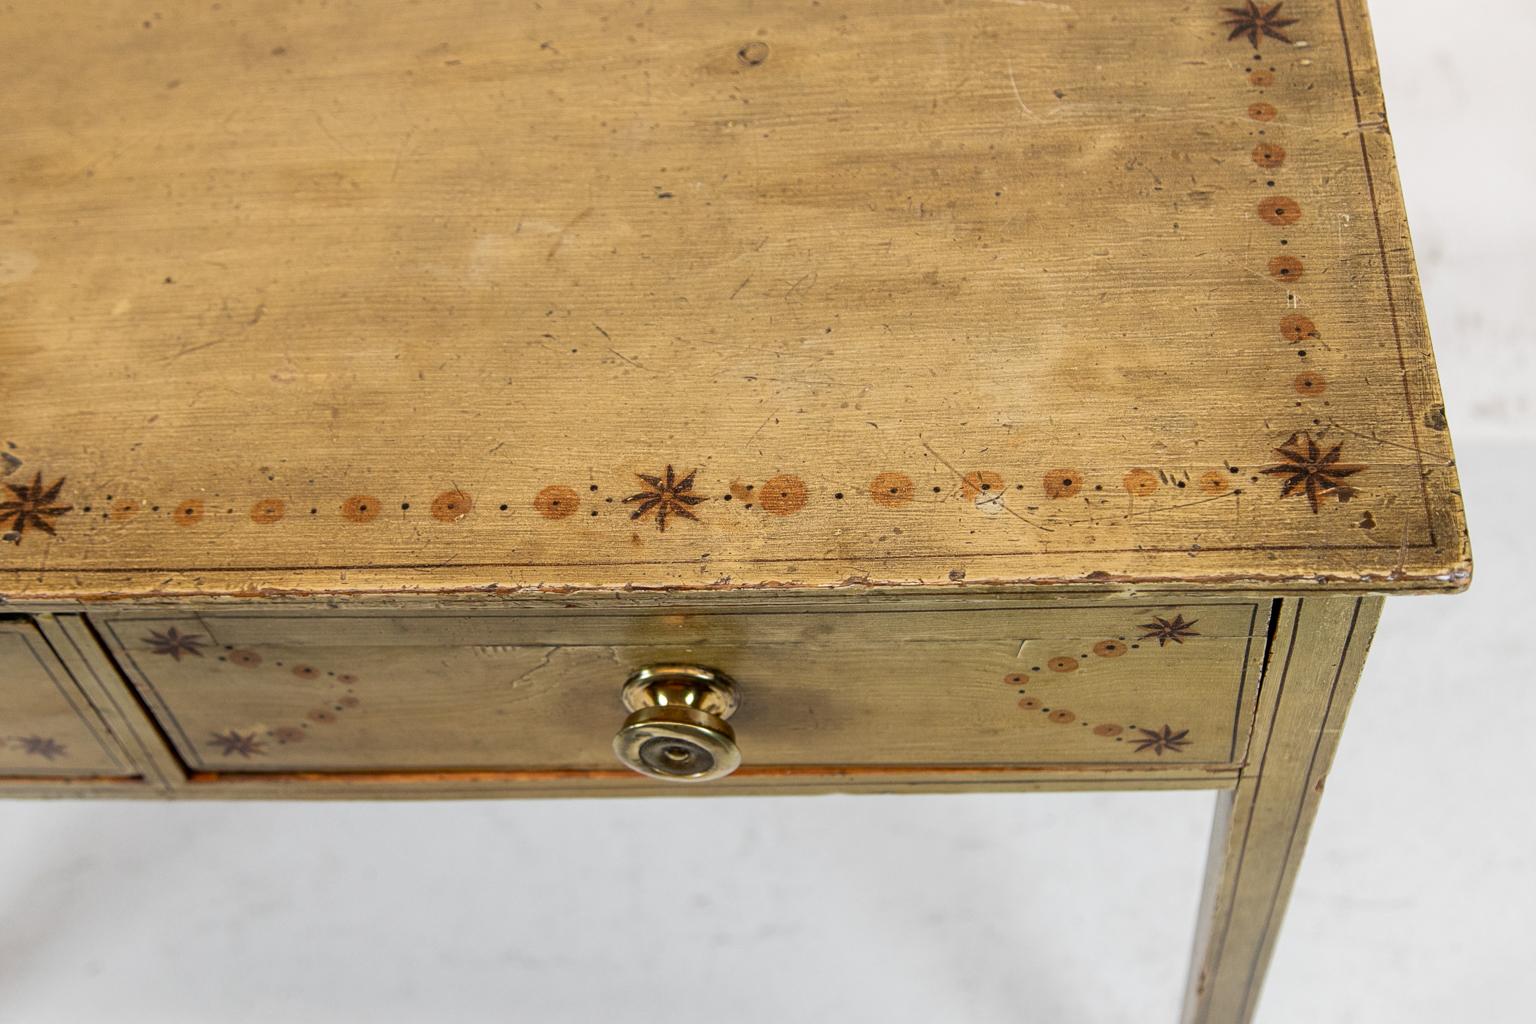 English faux painted two-drawer side table, with original brass knobs and paint. Stylized stars connected by a string of circular designs on the top and drawer fronts.